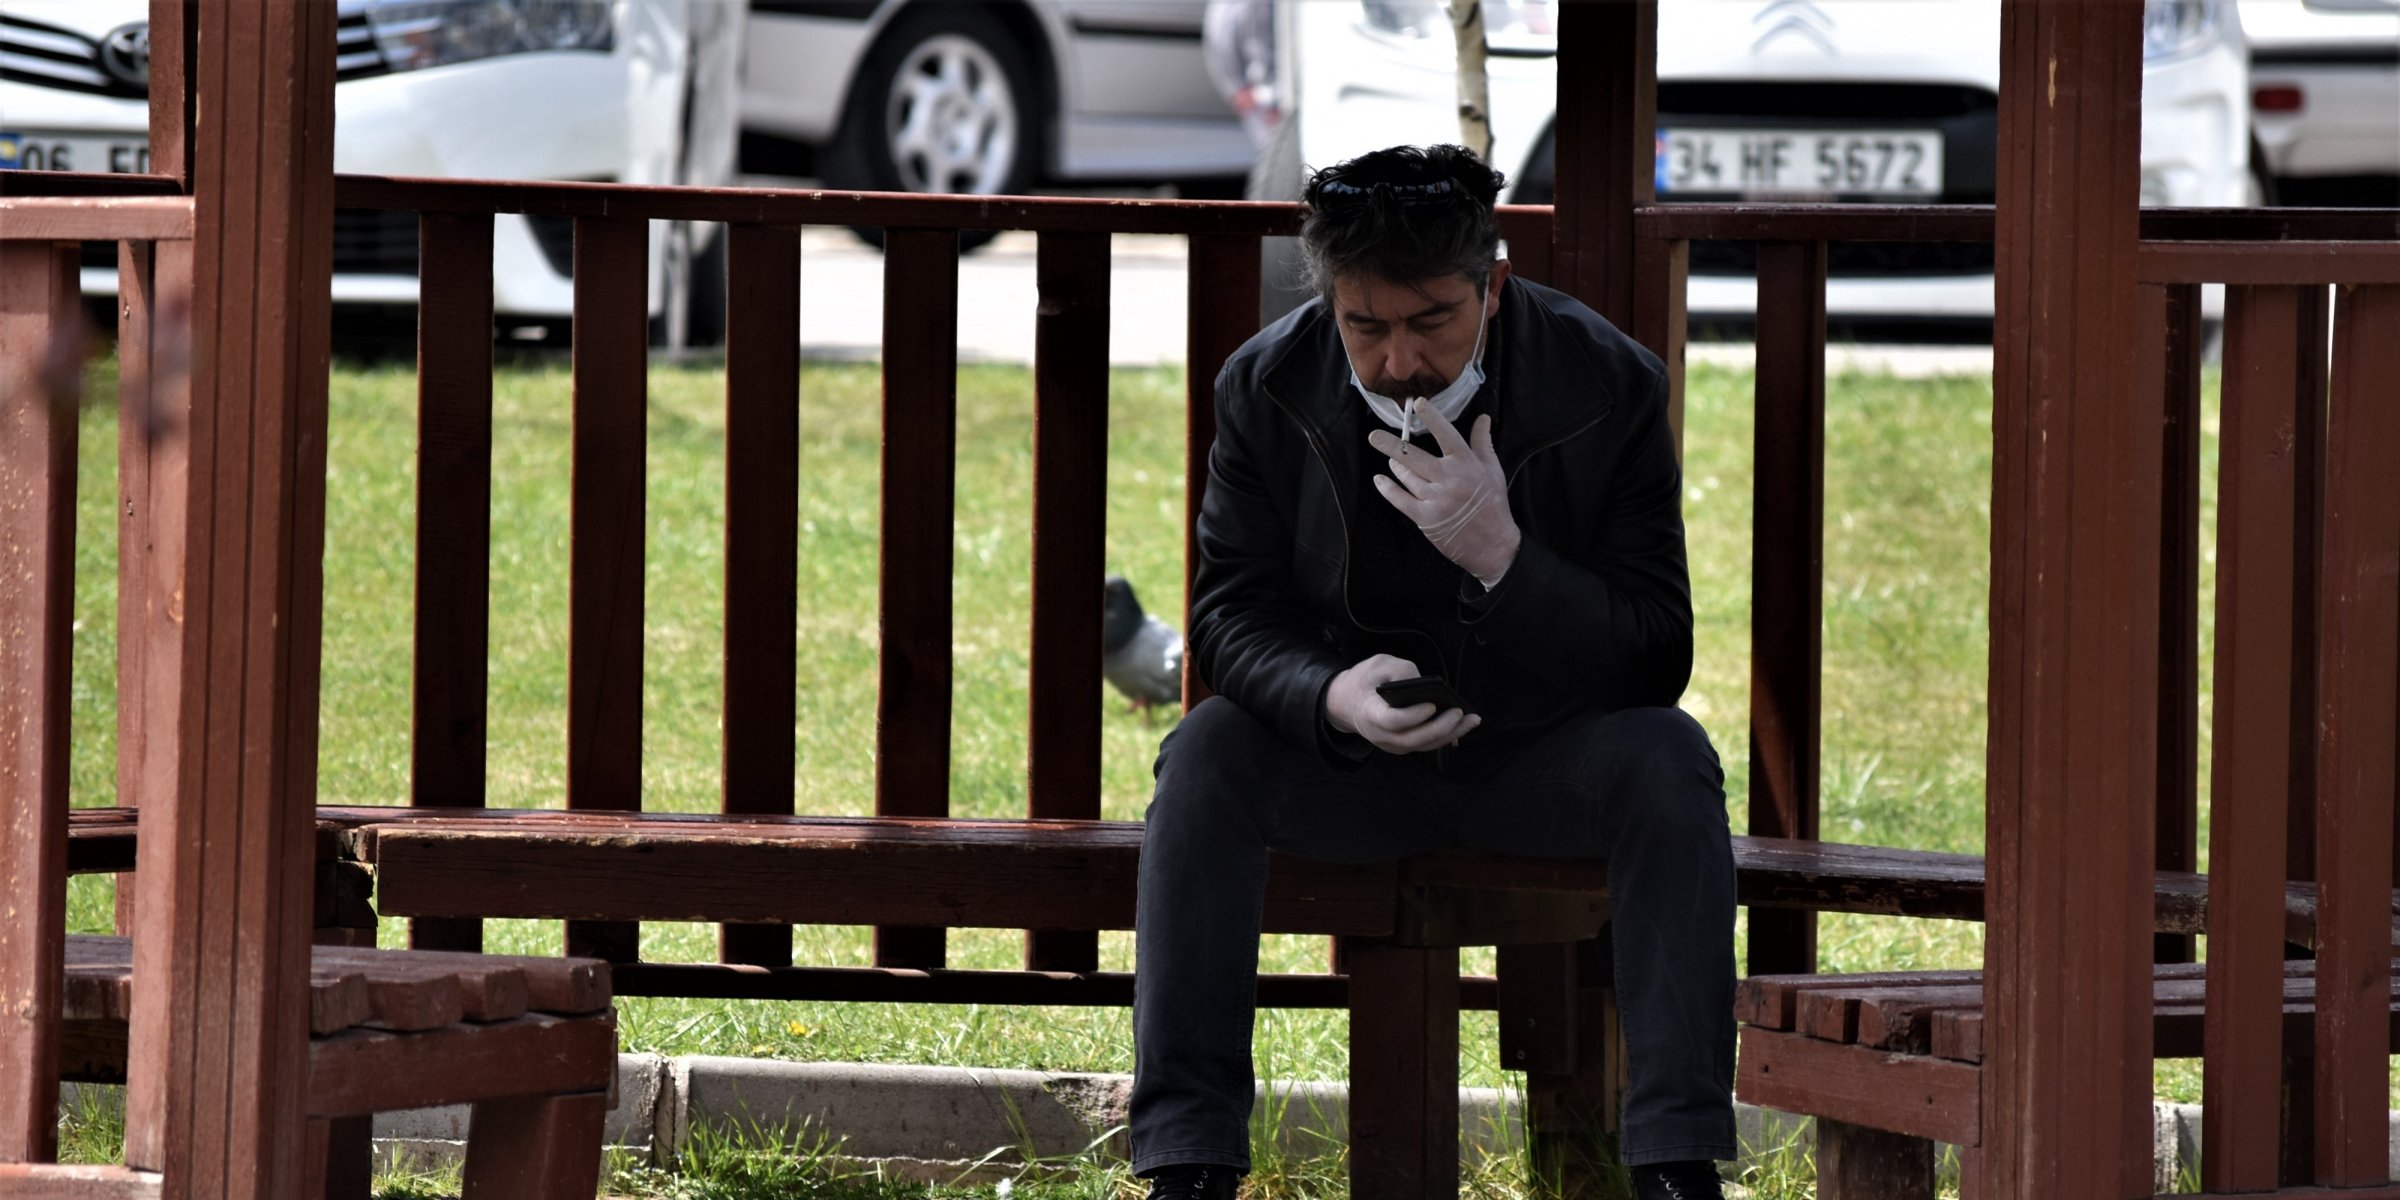 Turkey introduces smoking ban to curb virus infections